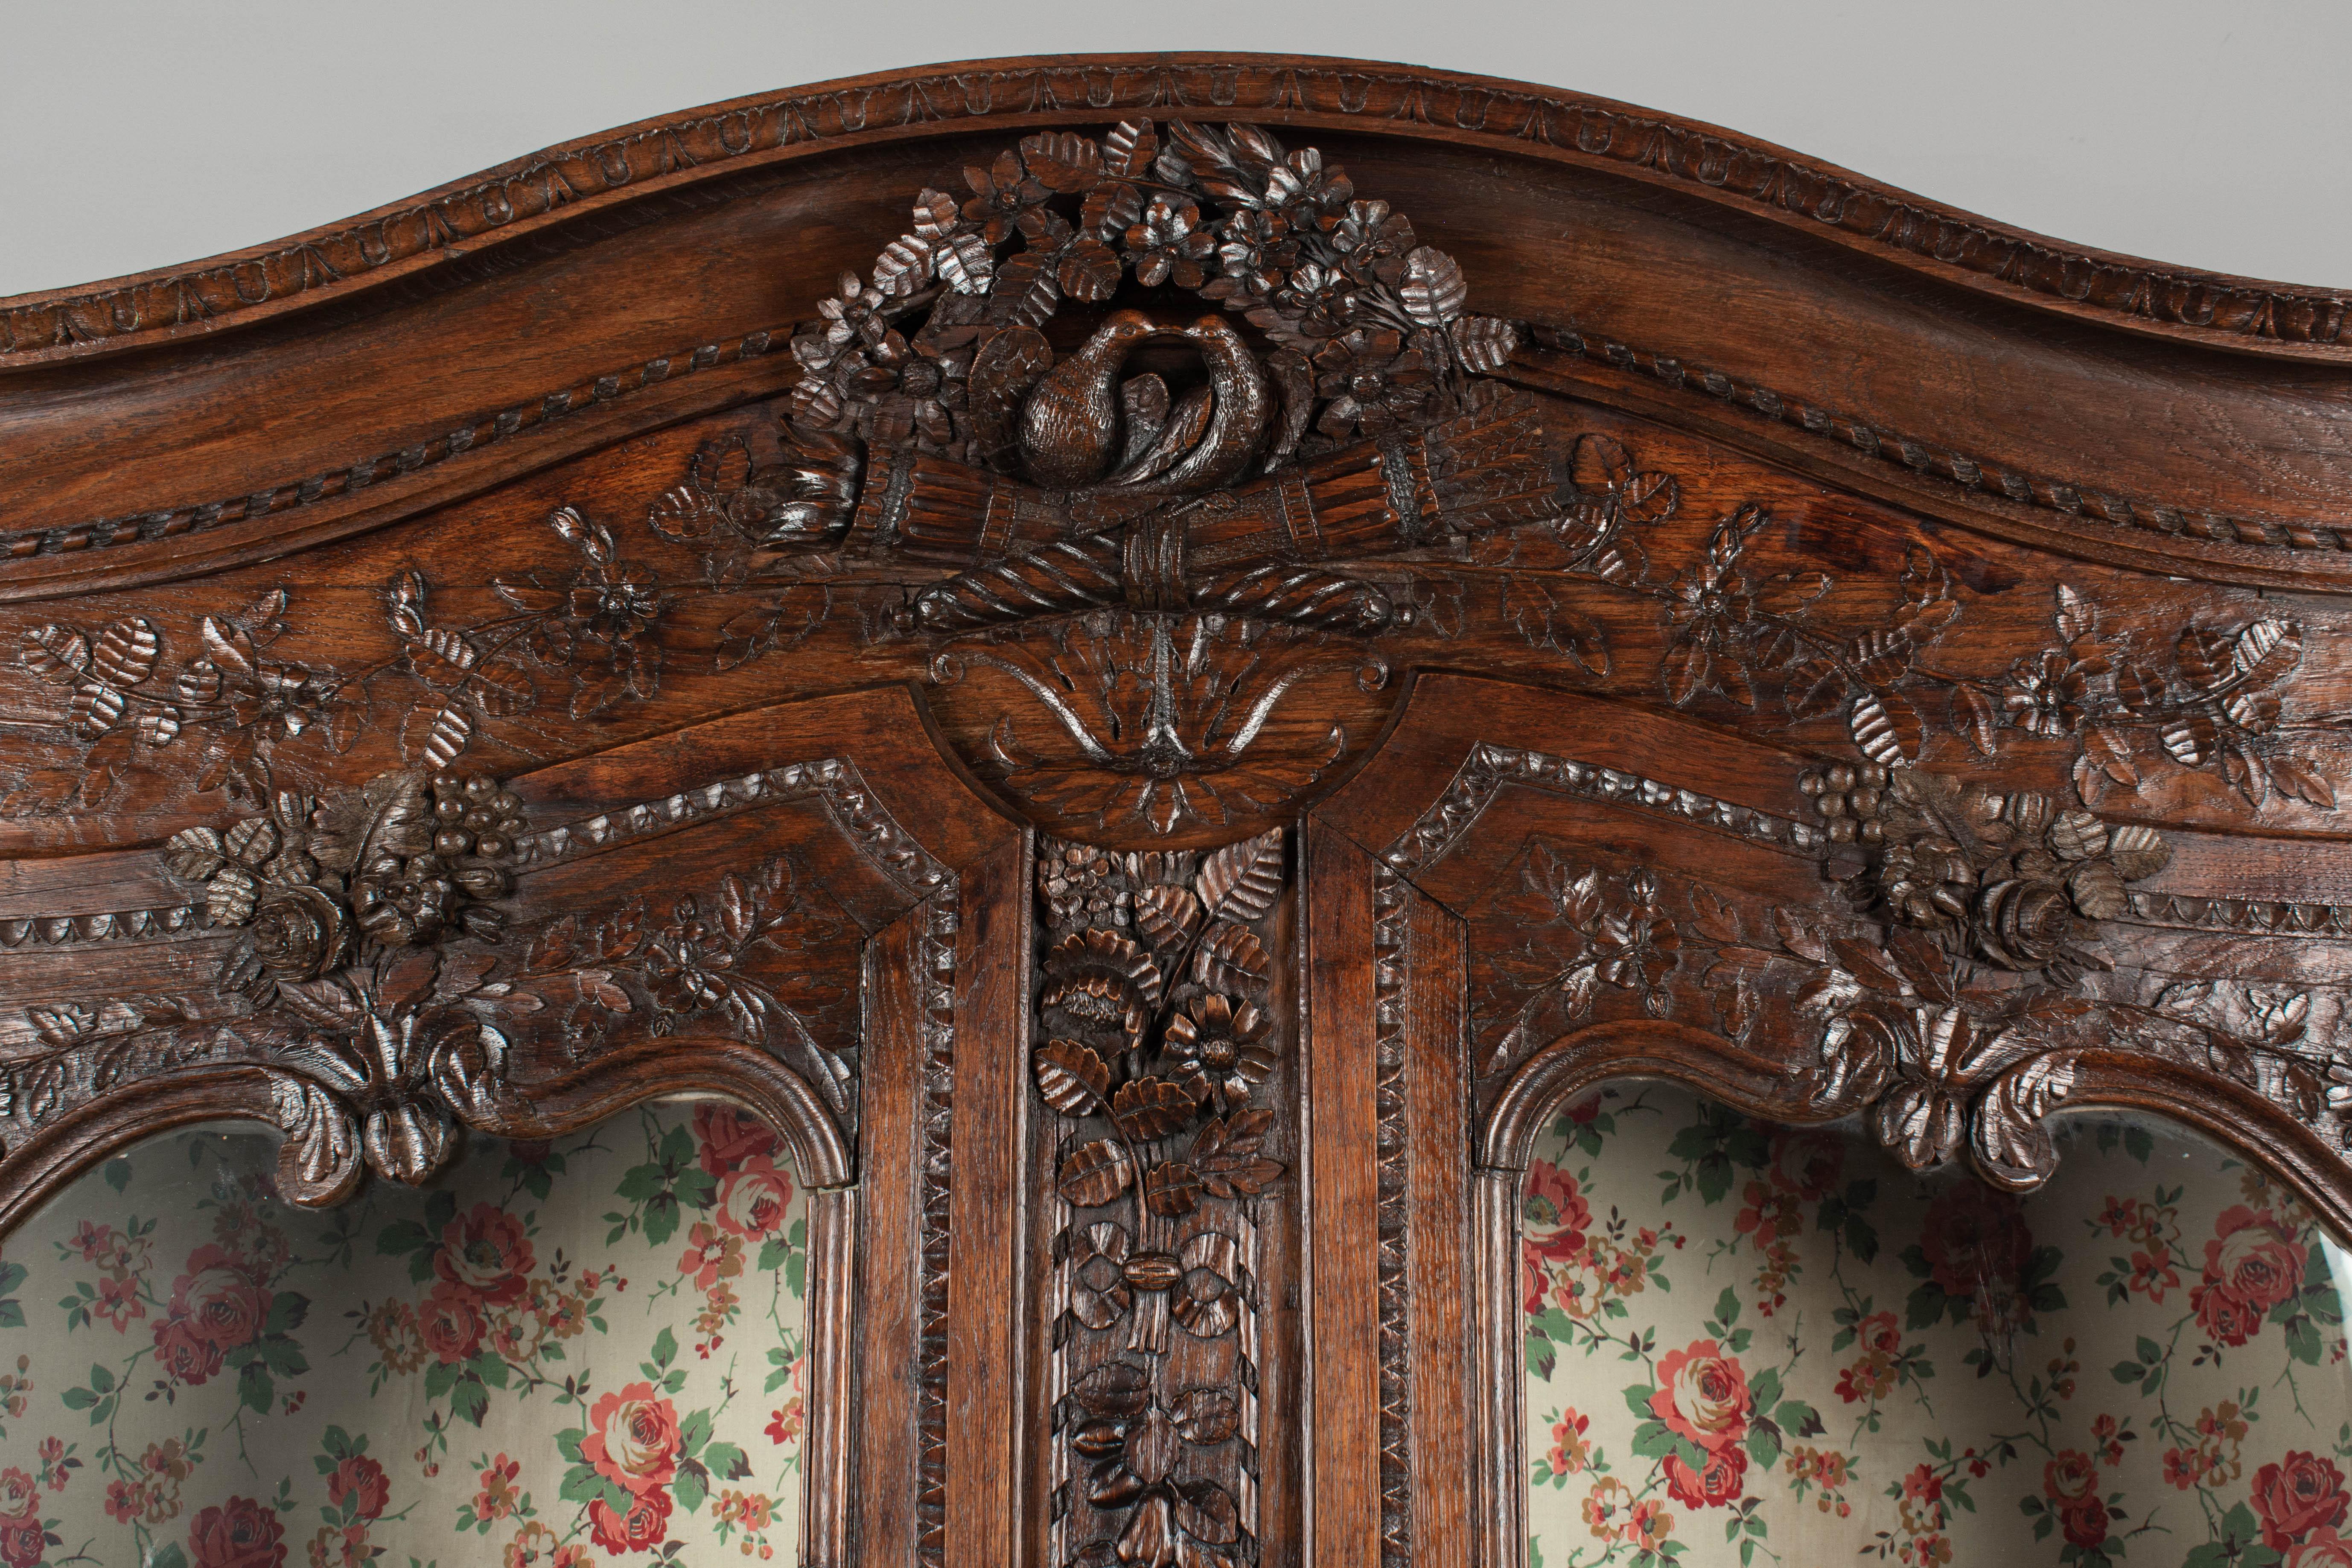 An 18th century Louis XV style country French buffet a' deux corps from Normandy made of solid hand carved oak. This was a traditional bridal gift, brought by the groom to the new house and has many romantic motifs. Beautifully detailed, three